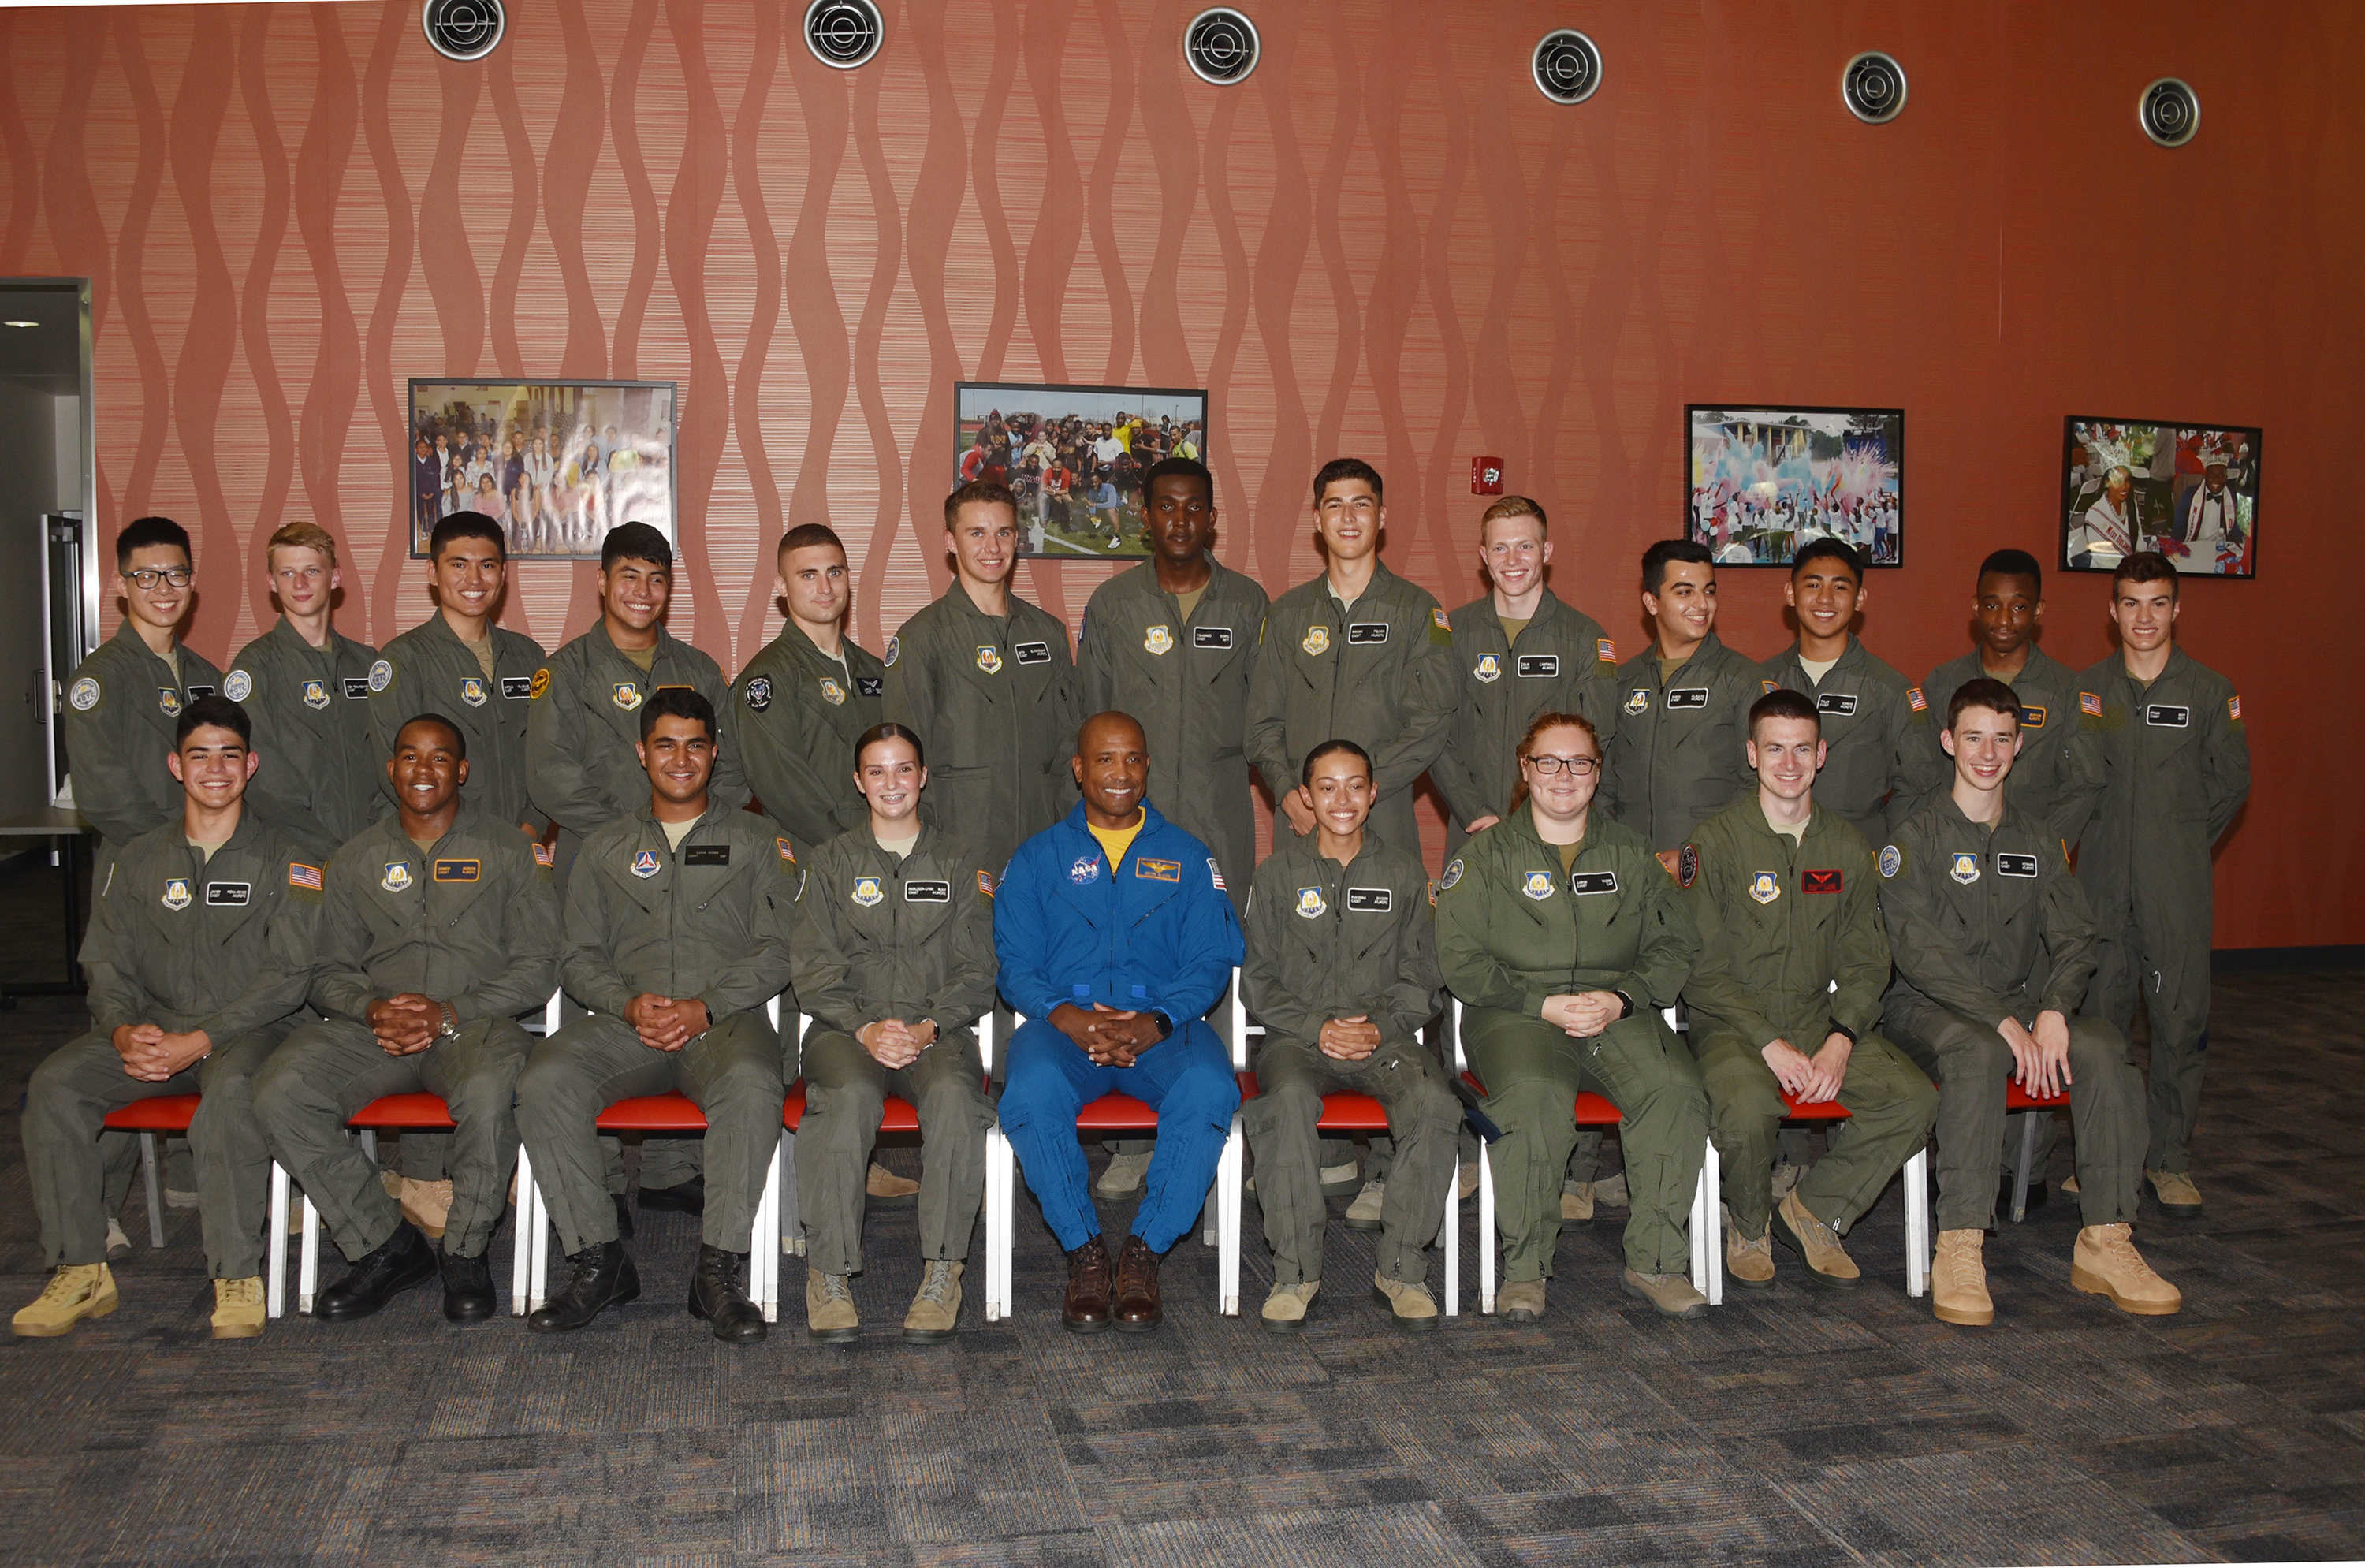 The summer 2021 class of the Cadet Flight Training Program poses with Cmdr. Victor J. Glover Jr. (center in blue), a NASA astronaut who recently returned from a mission on the International Space Station. Cmdr. Glover was the keynote speaker for the program's graduation ceremony.